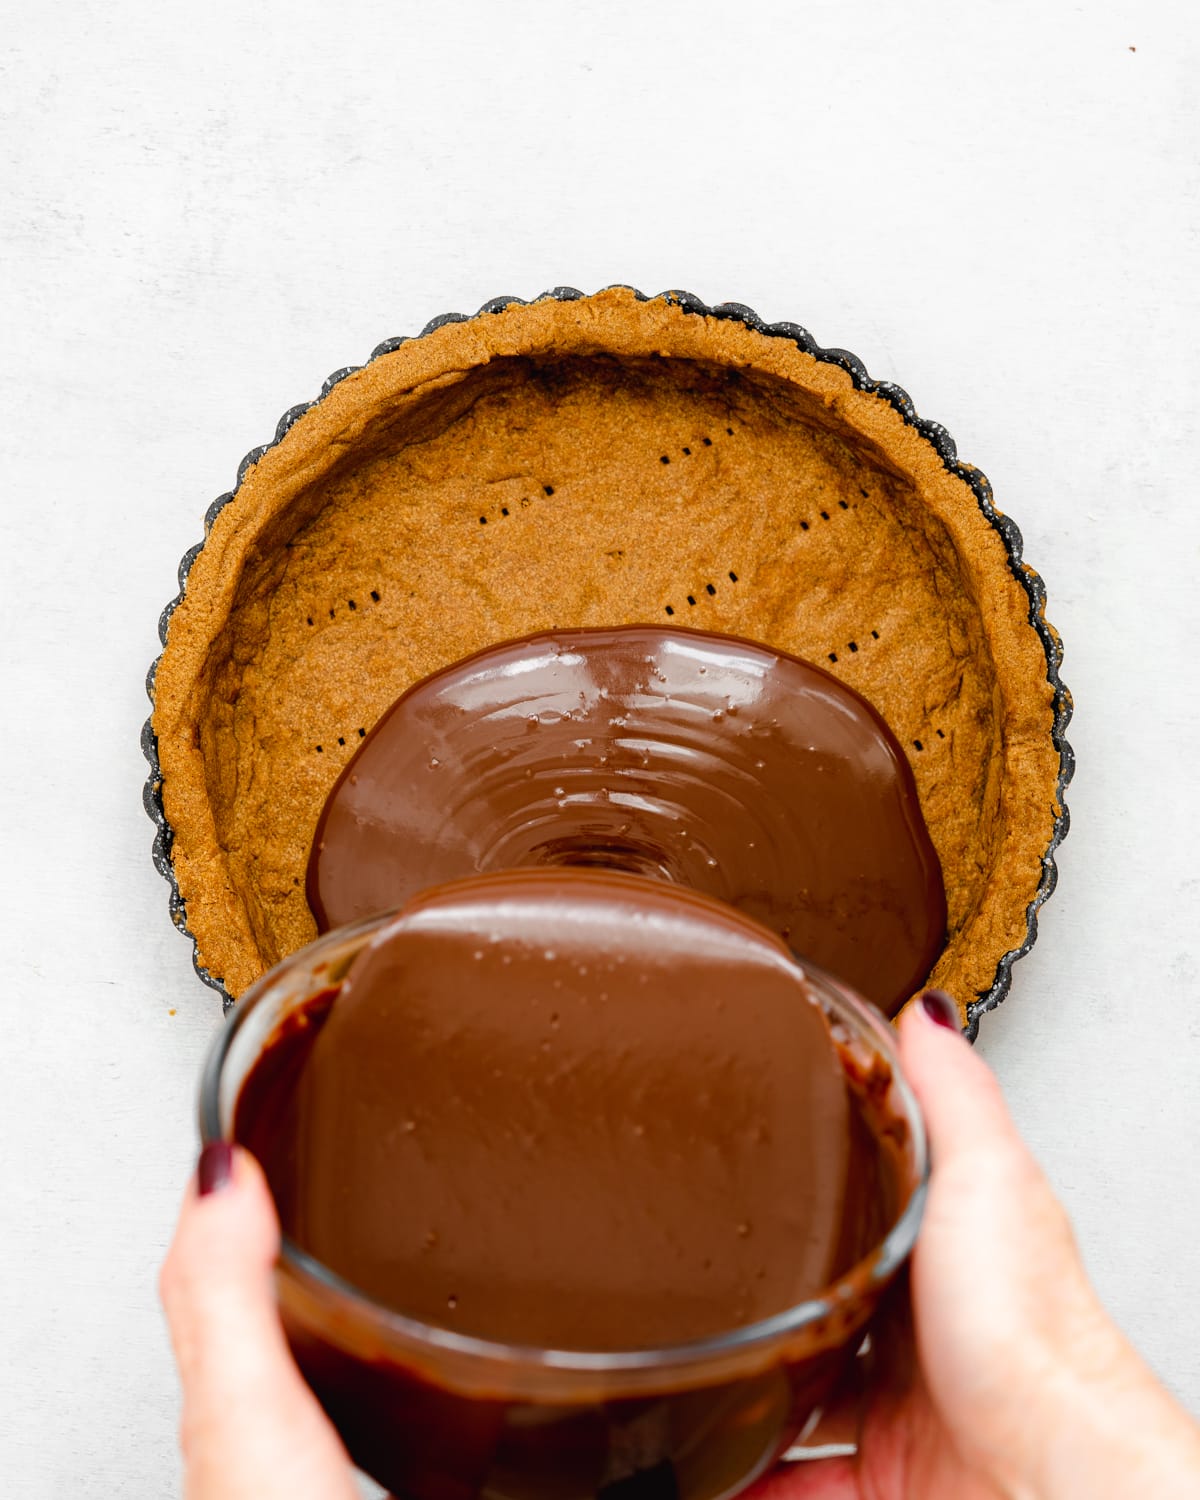 pouring chocolate ganache into a tart shell.